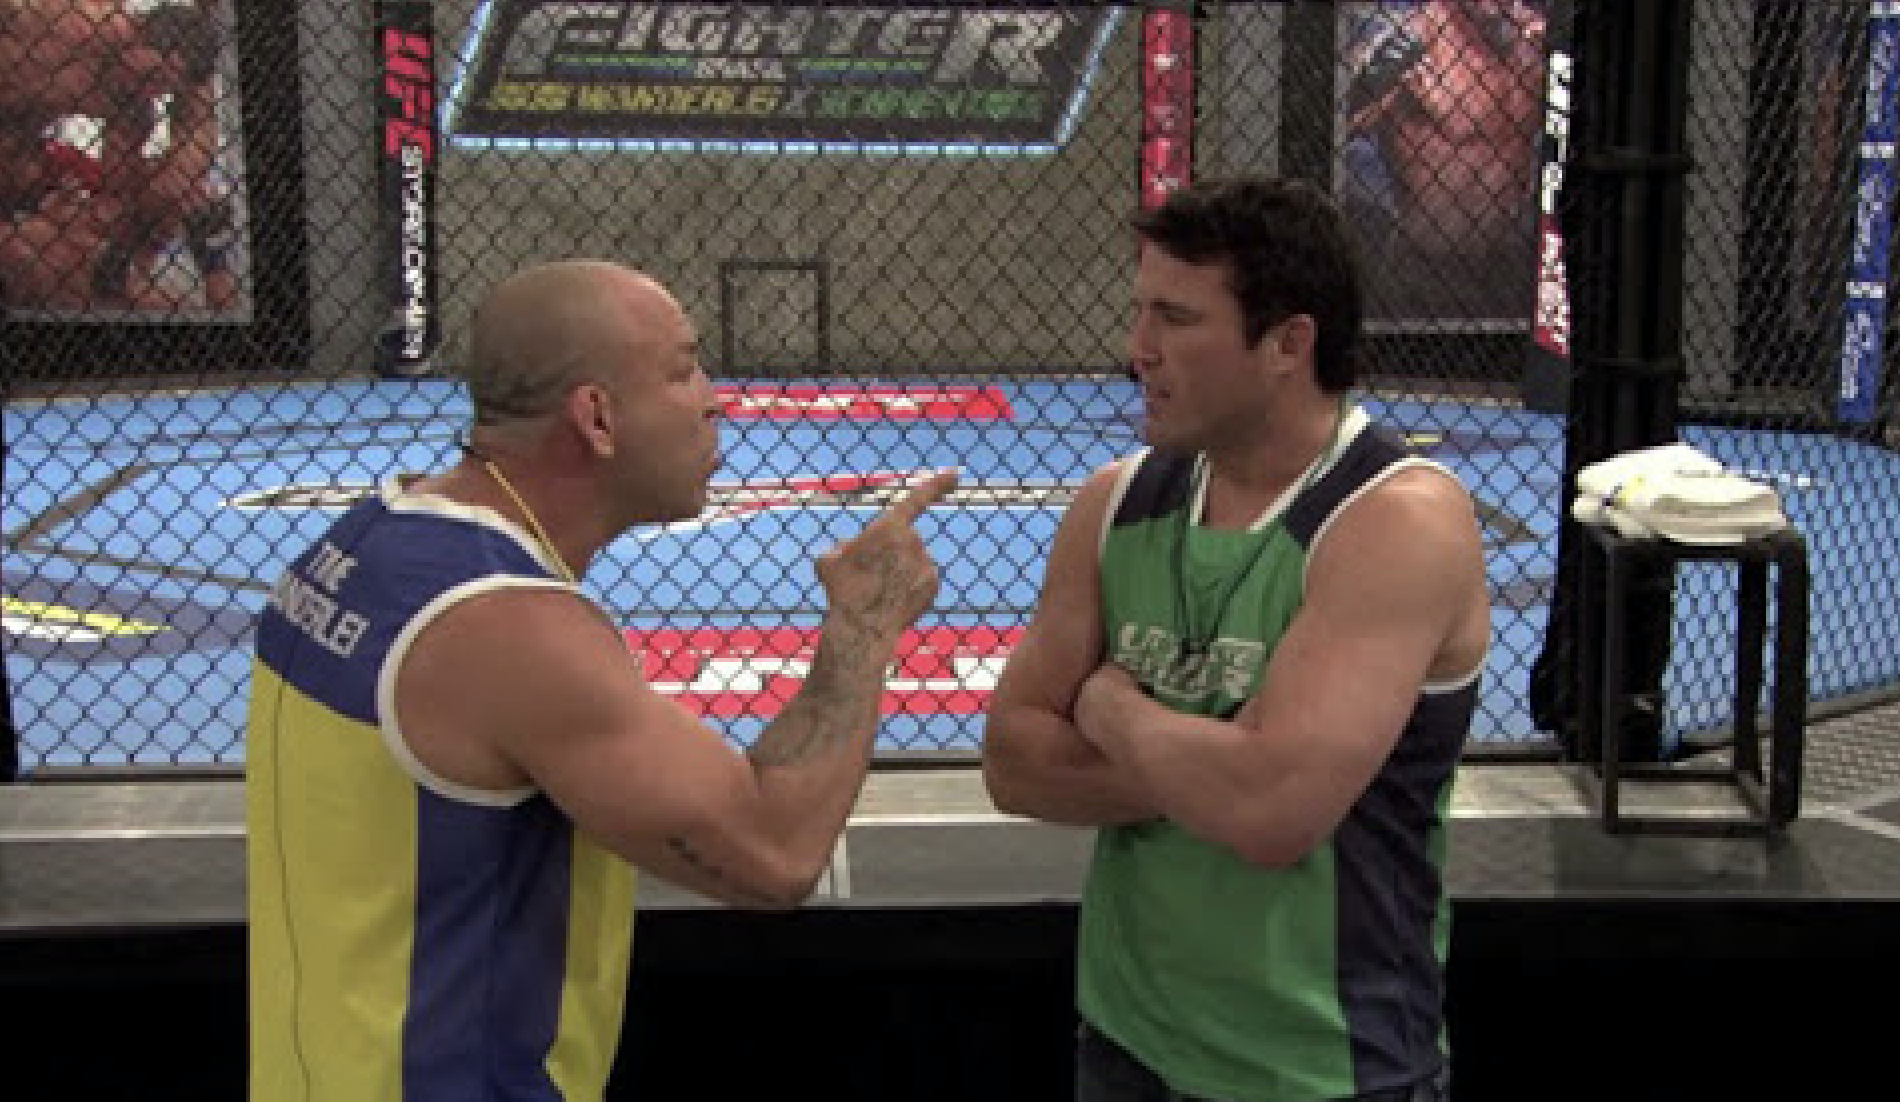 Chael Sonnen Recounts His Infamous TUF Rivalry With Wanderlei Silva